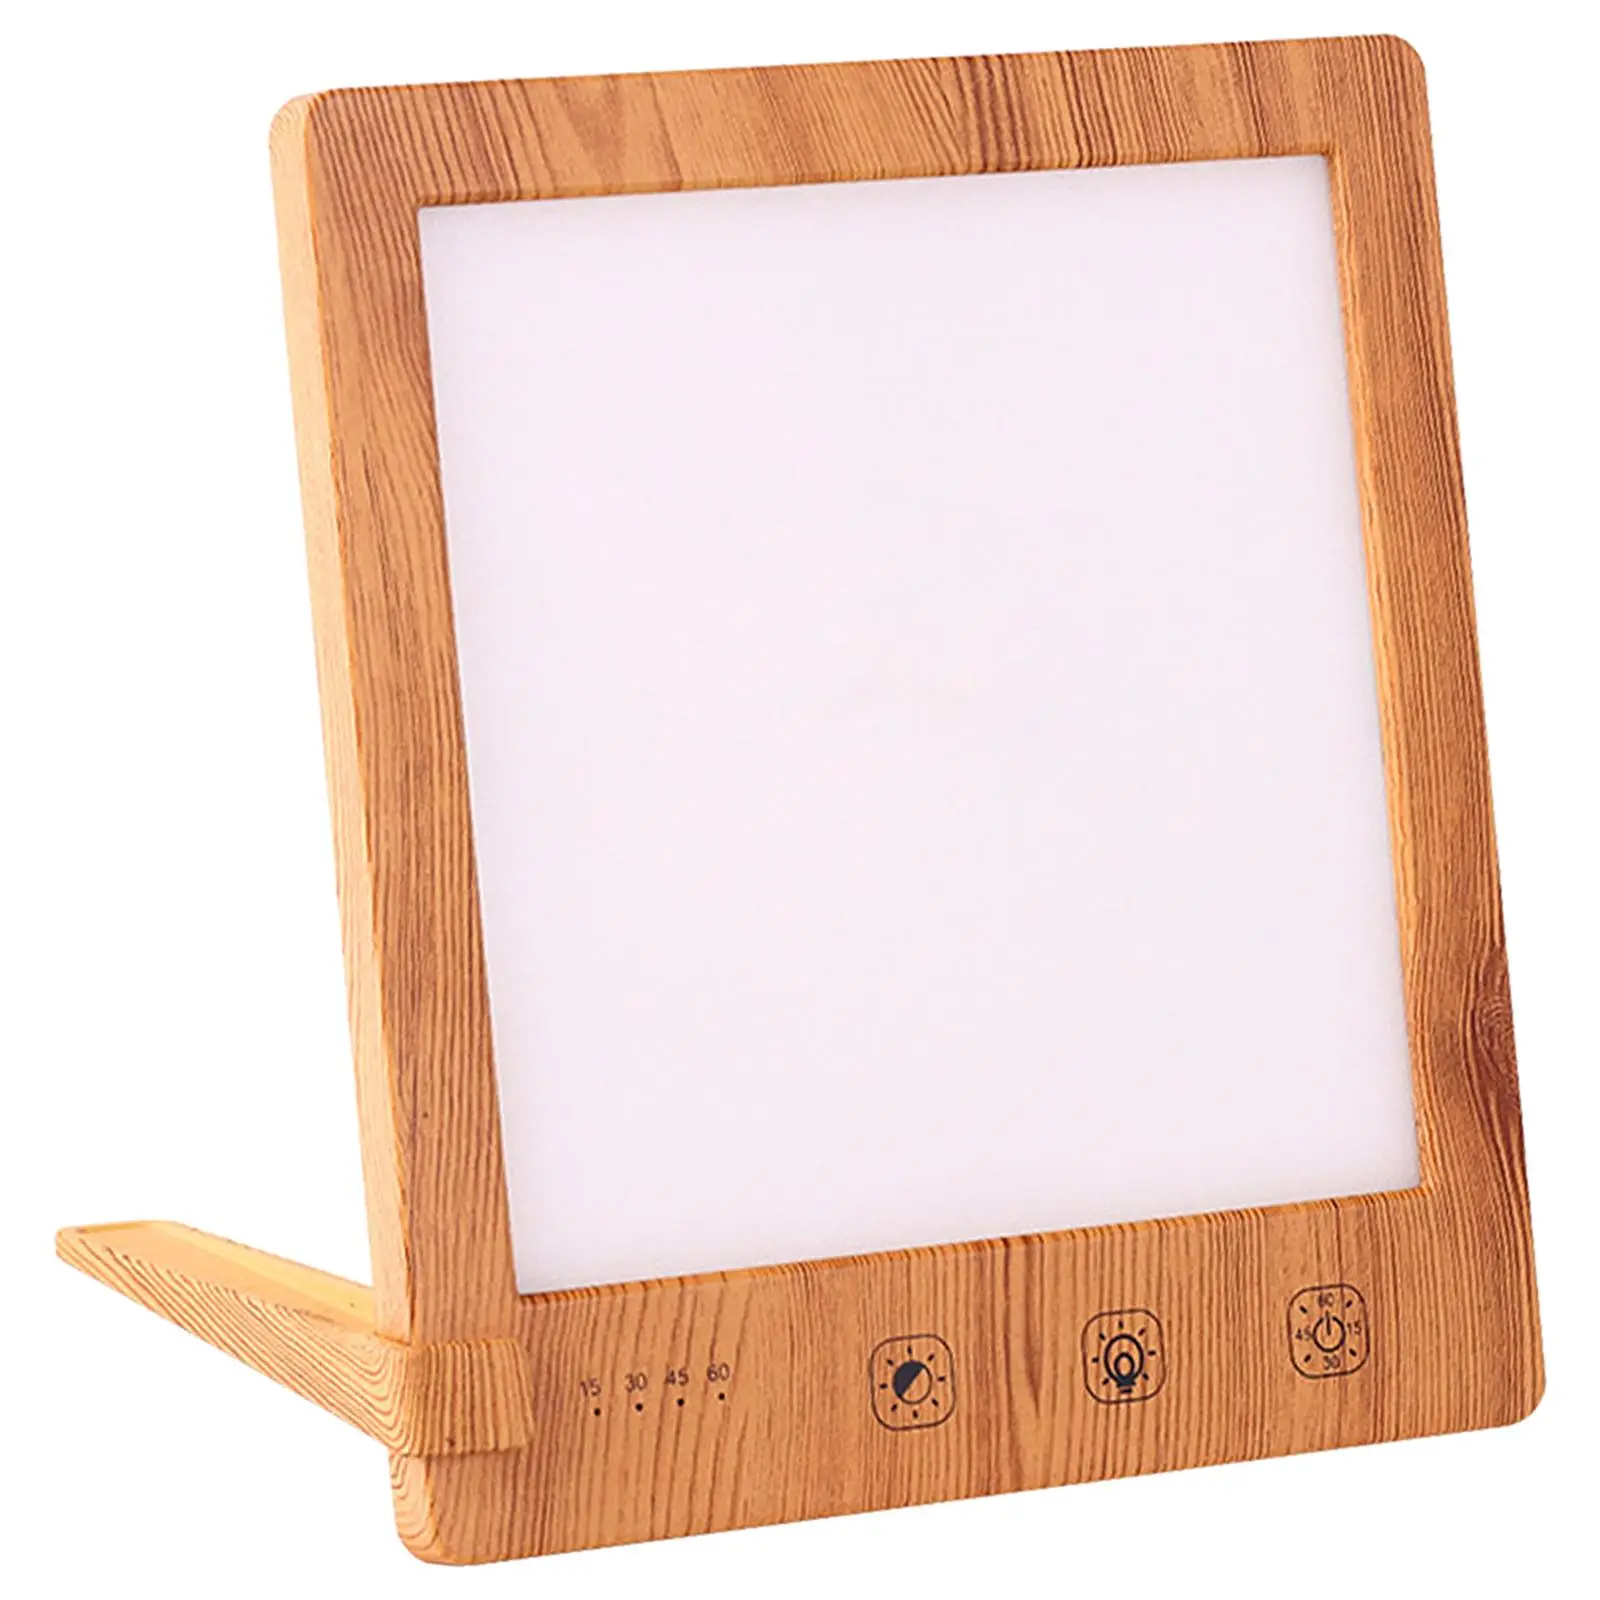 Sad LED Light Therapy Lamp 10000 Lux 4 Timer Levels Daylight Lamp Adjustable Brightness UV Free Touch Control Sun Lamp